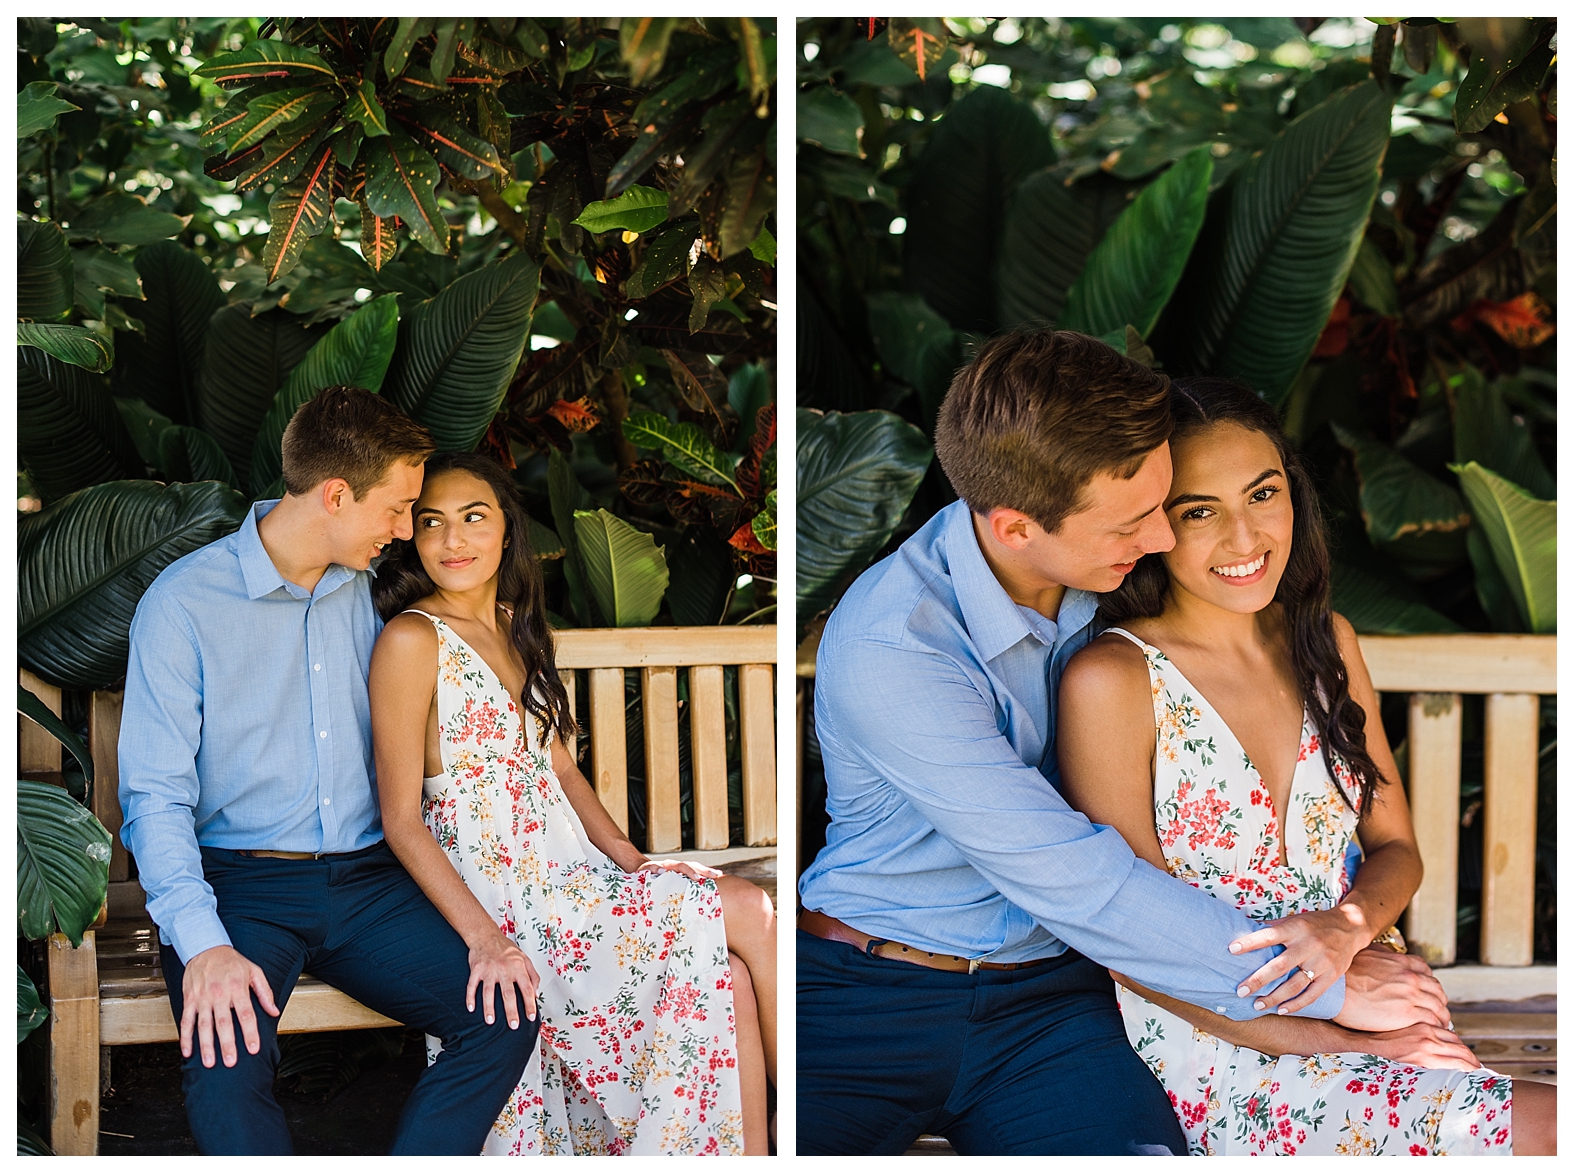 poses for couples, couple poses, engagement session inspiration, stpetersburg wedding photographer, st petersburg engagement photographer, sunken gardens photographer, sunken gardens wedding photographer, sunken gardens engagement session, cute couple poses